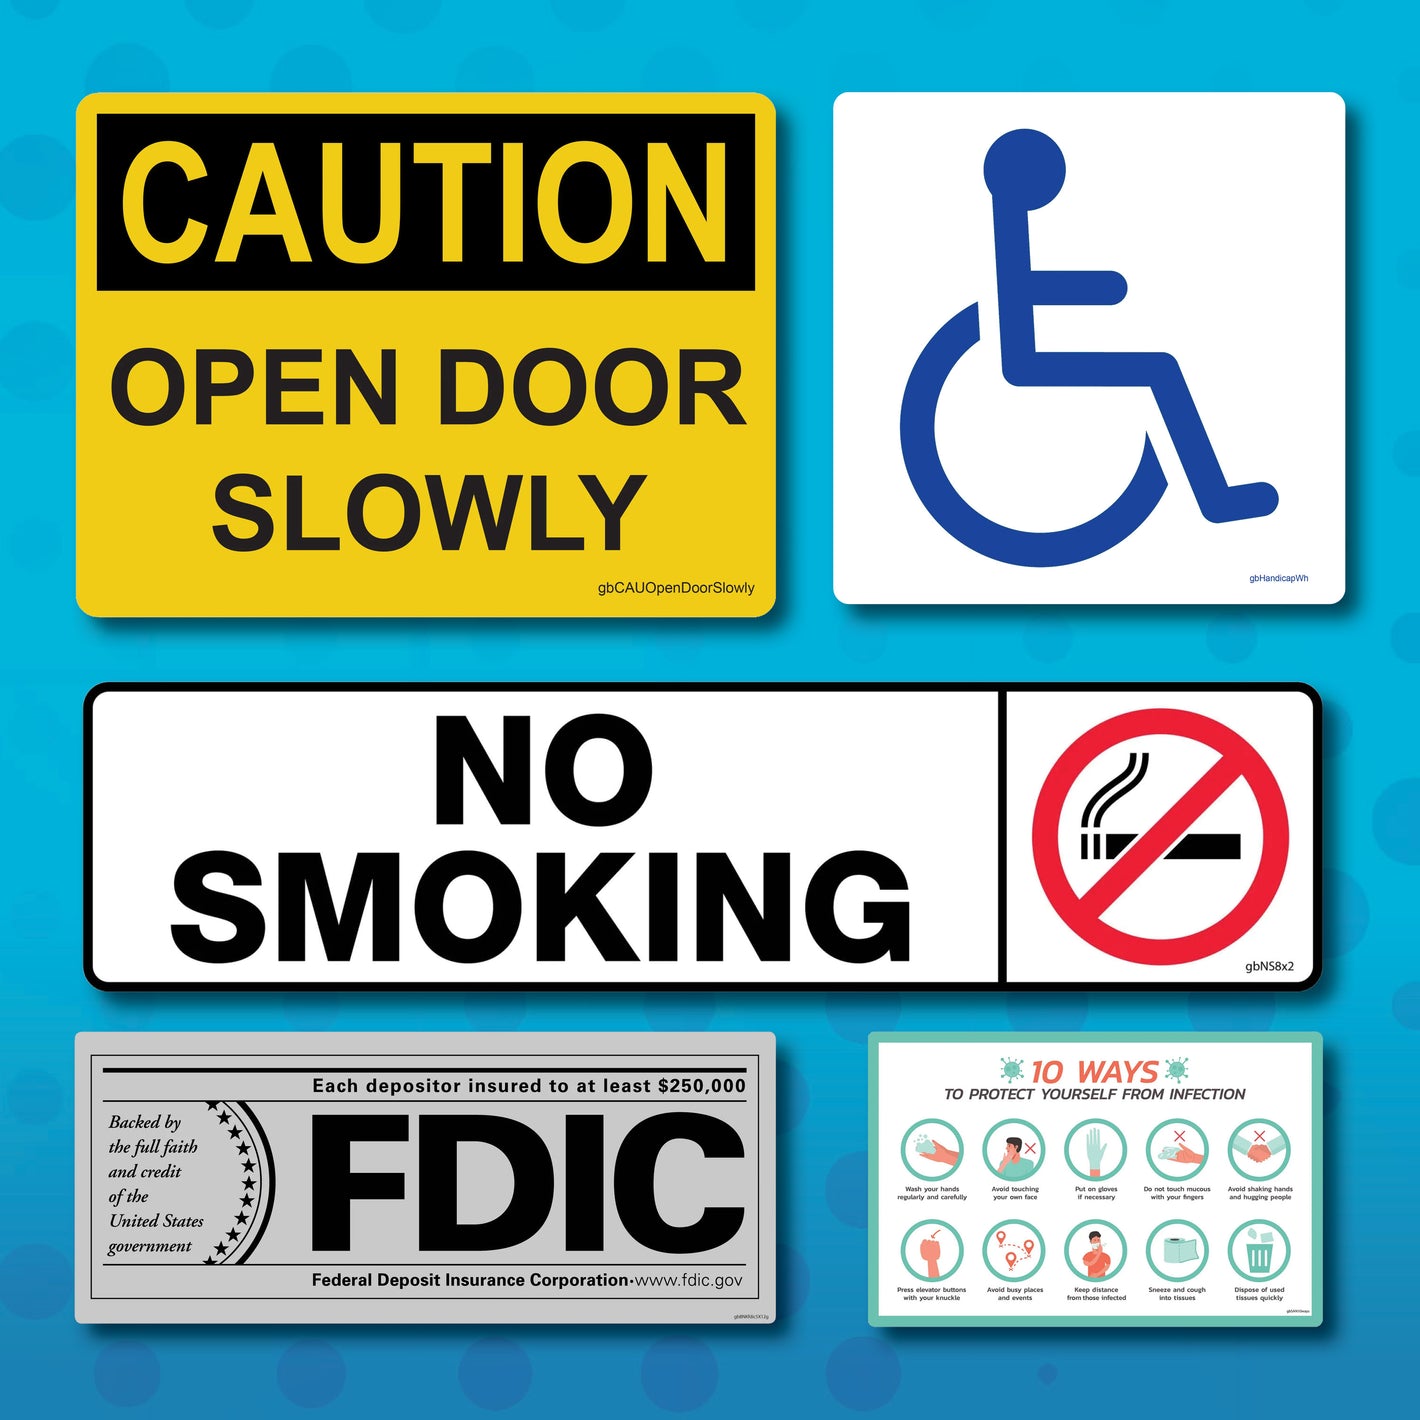 Decals and signage for any business. Let your customers know your policies, place warnings, and identify as ADA compatible.